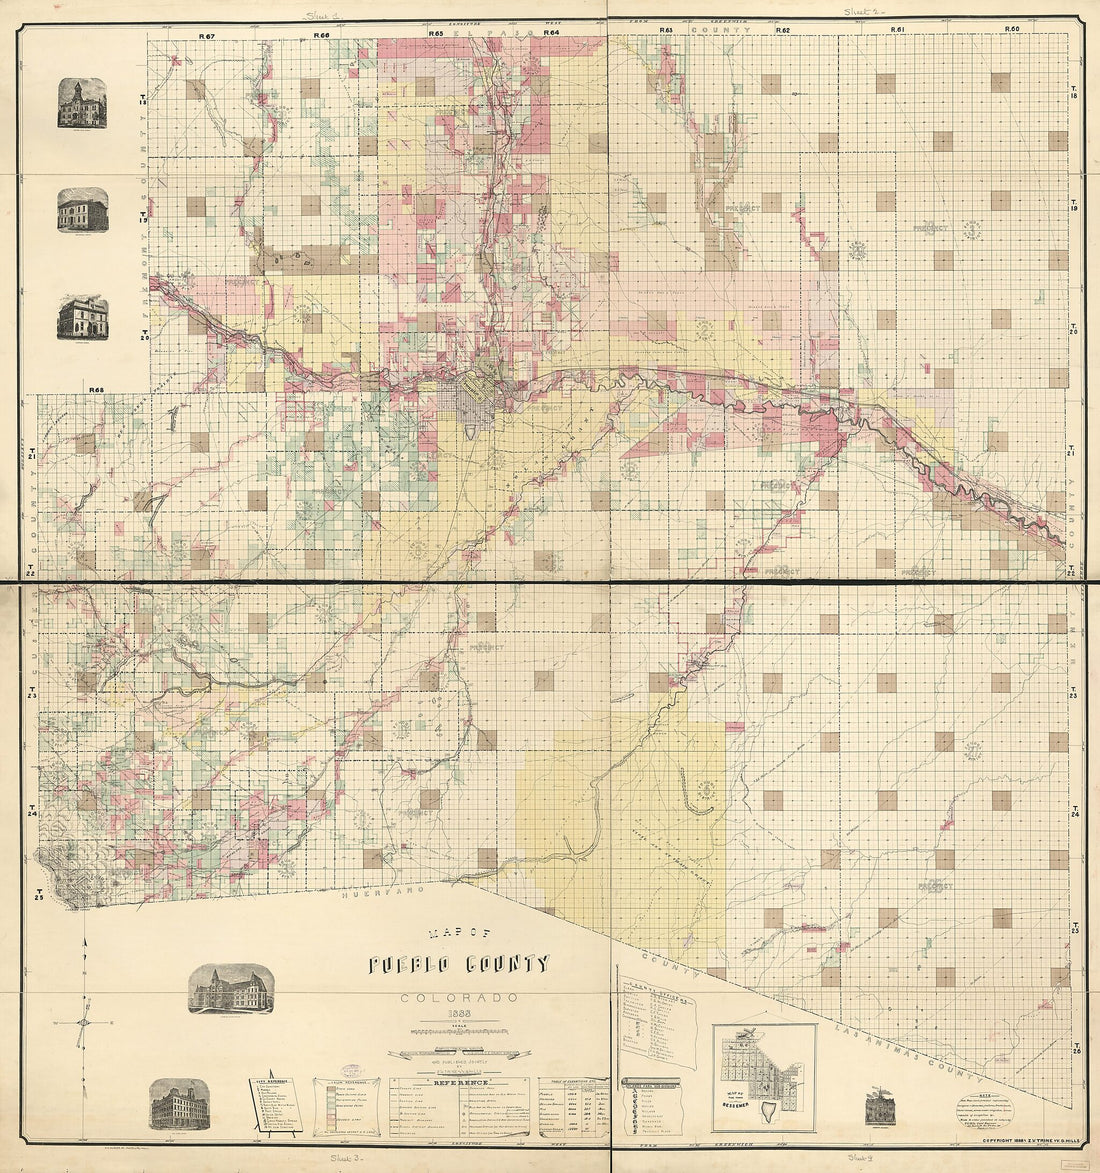 This old map of Map of Pueblo County, Colorado from 1888 was created by V. G. Hills, Z. V. Trine in 1888